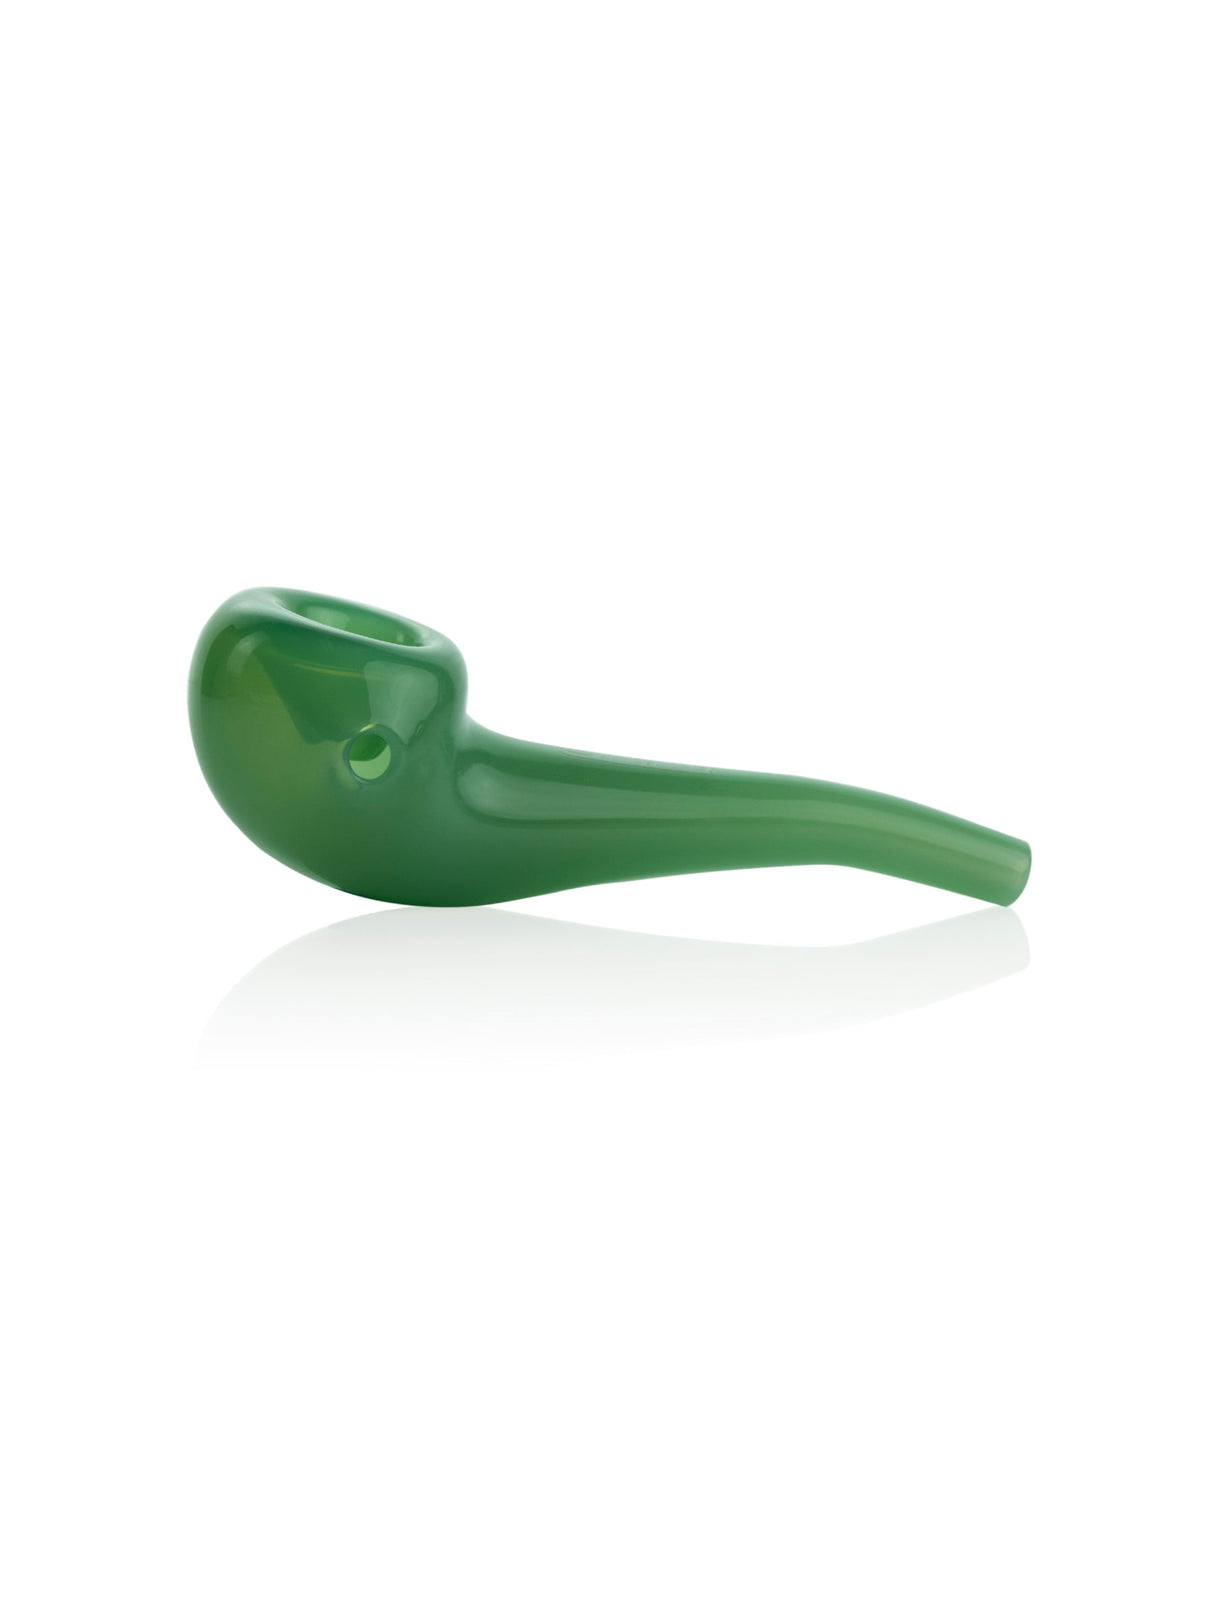 GRAV Mini Mariner Sherlock Hand Pipe in Mint Green, Compact 3" Size, Side View on White Background